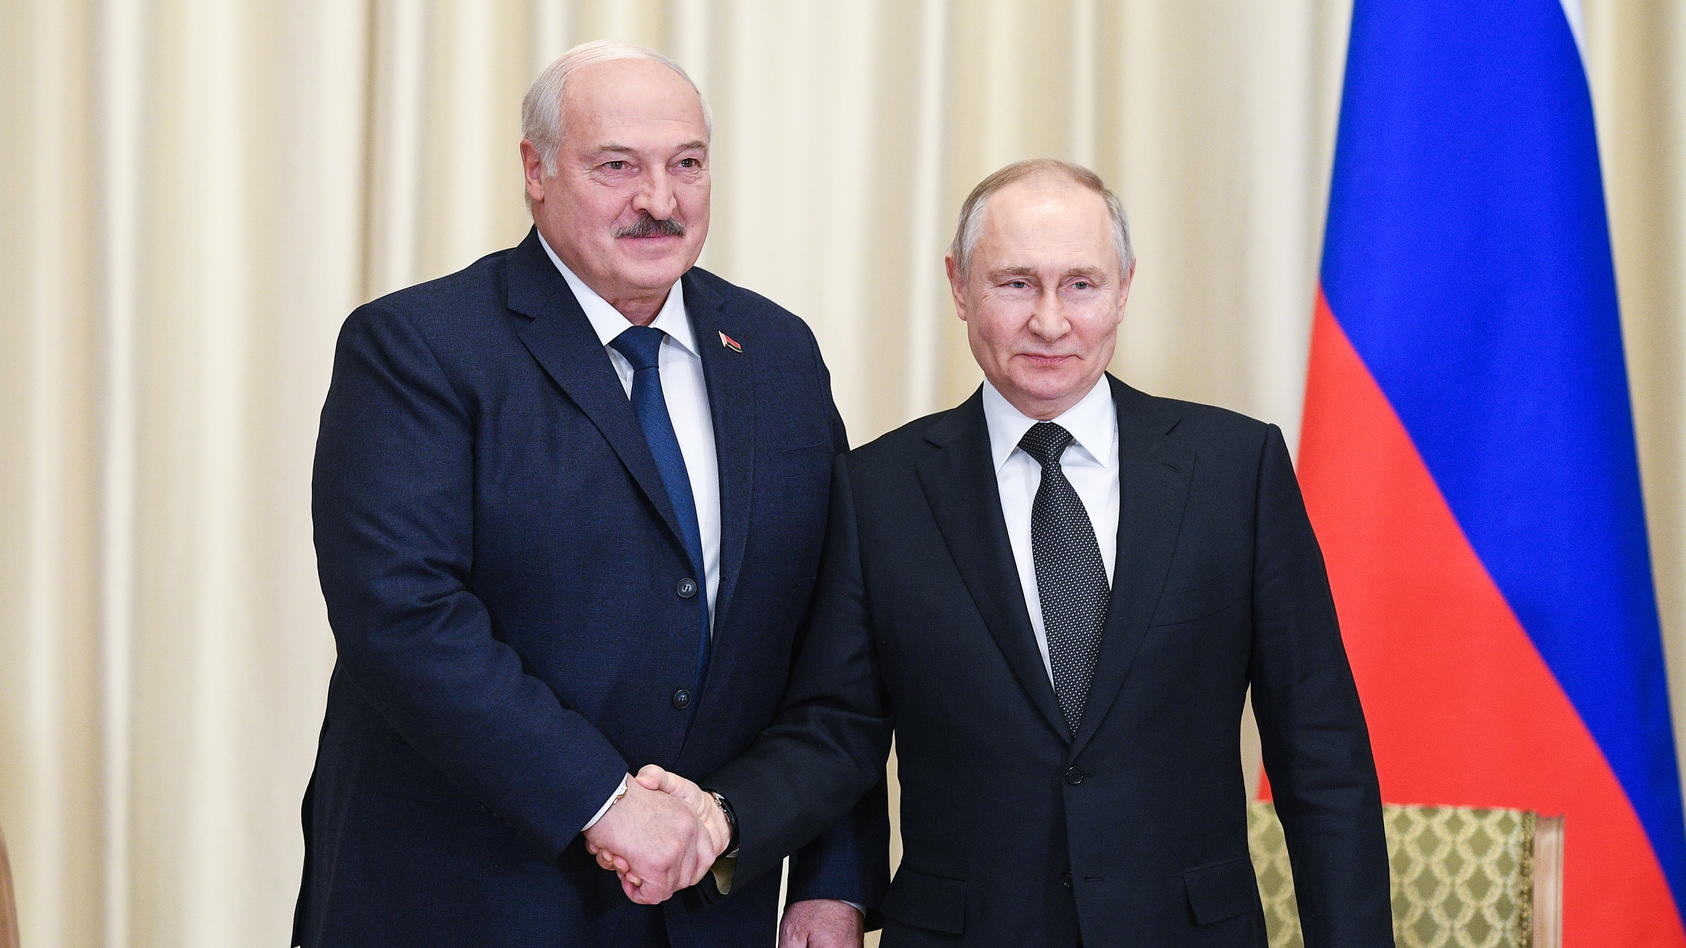 RUSSIA, NOVO-OGARYOVO - FEBRUARY 17, 2023: Belarusian President Alexander Lukashenko (L) and Russia's President Vladimir Putin shake hands as they pose for a photograph during a meeting in the Novo-Ogaryovo residence. Vladimir Astapkovich/POOL/TASS /